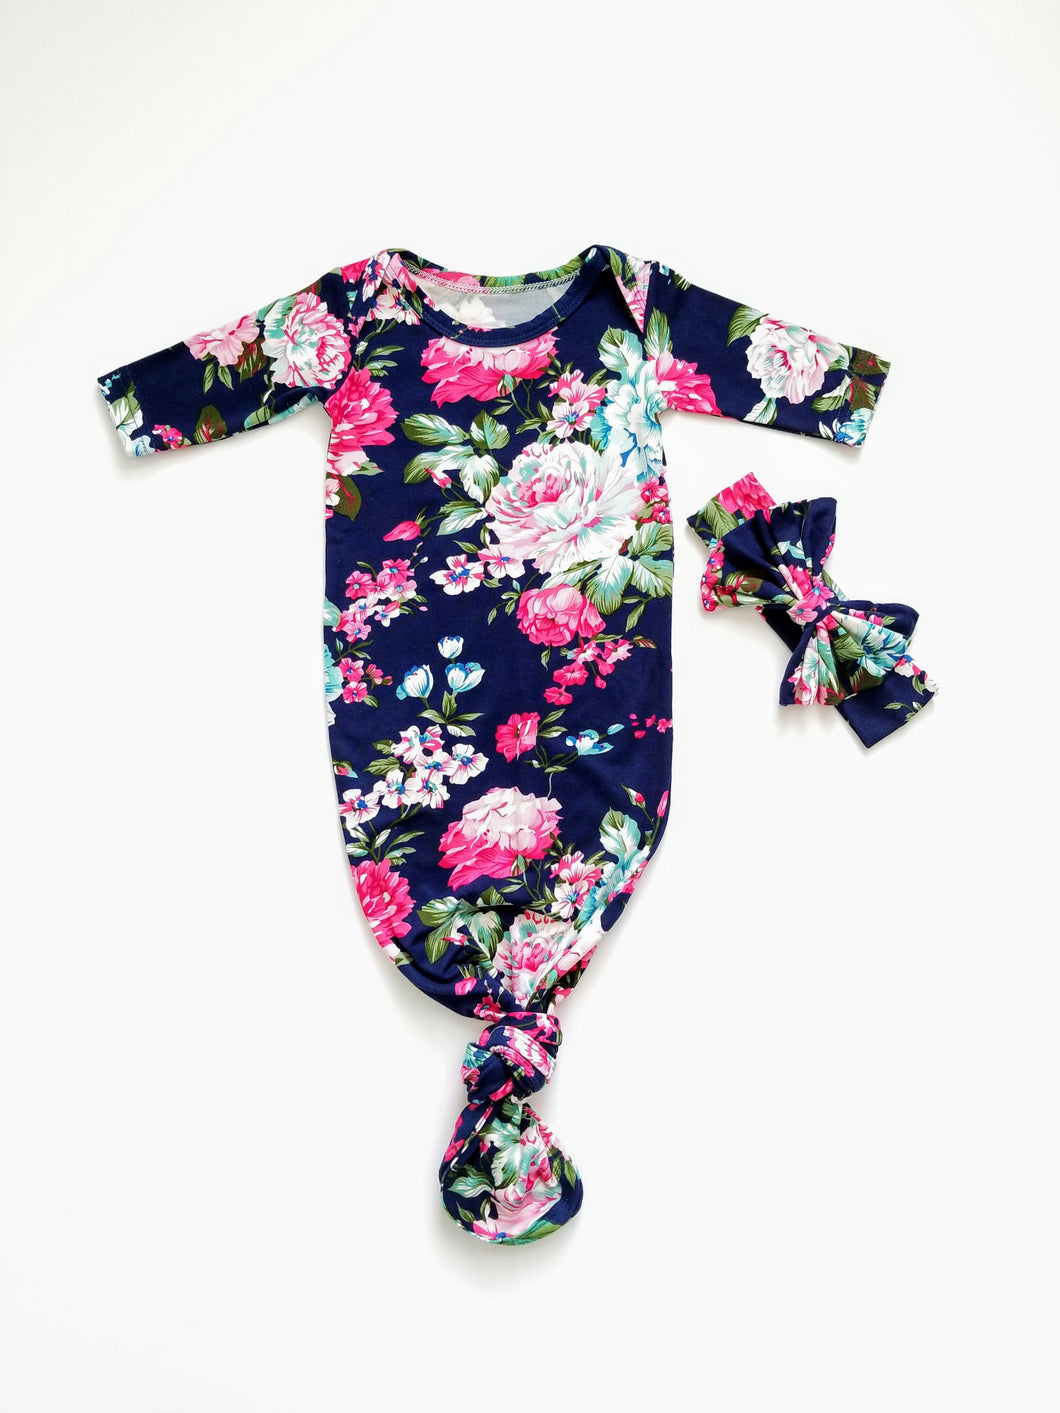 Navy Floral Newborn Knotted Gown Coming Home Outfit Girl - Adassa Rose